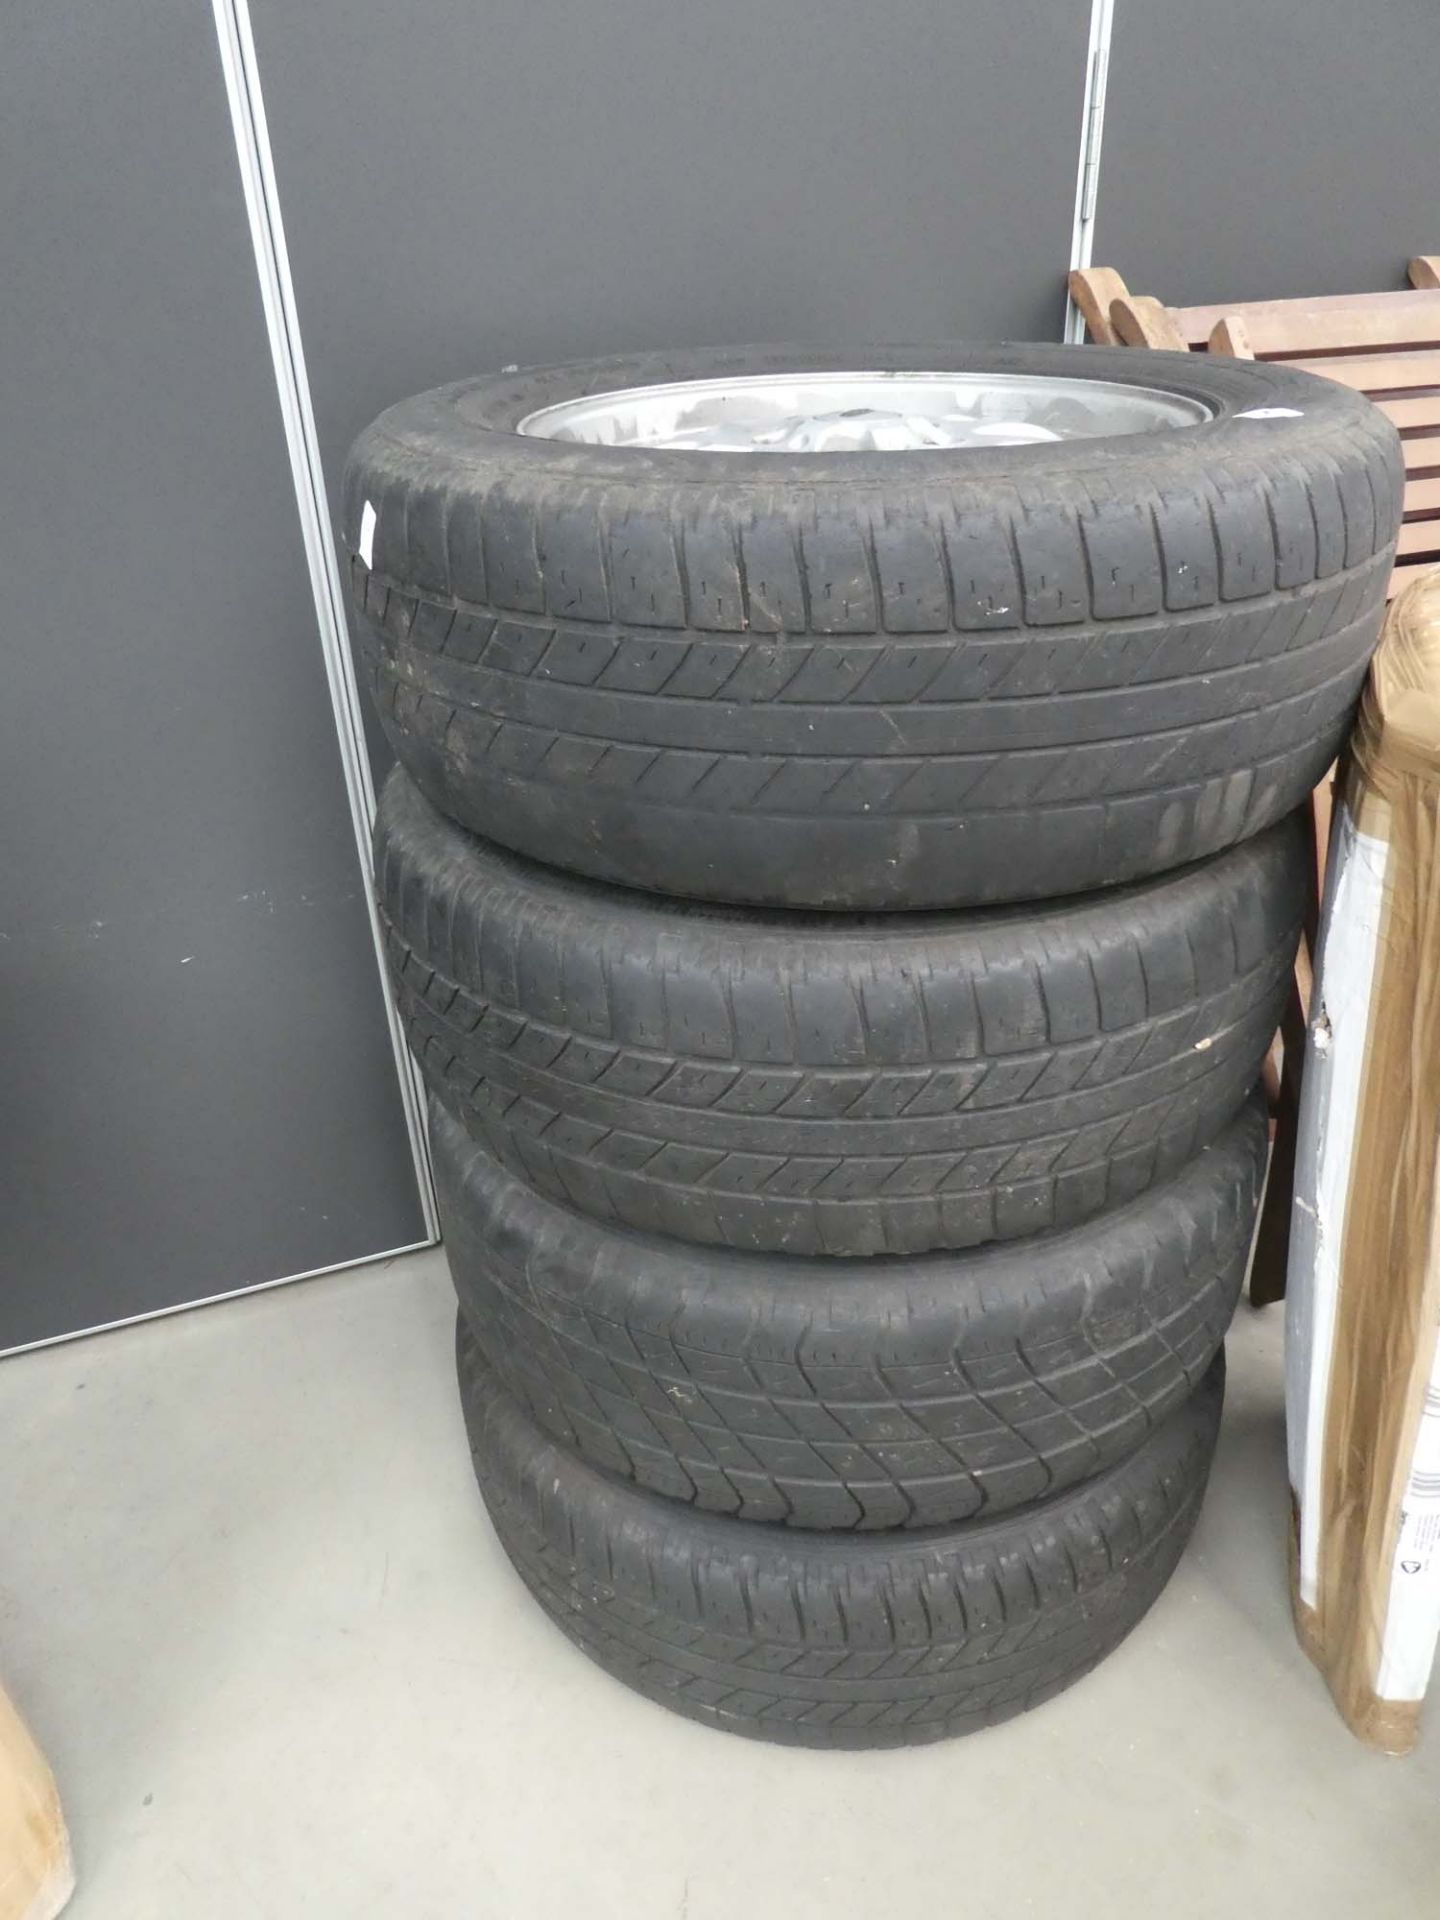 4 Land Rover alloy wheels and tyres, size 2556018